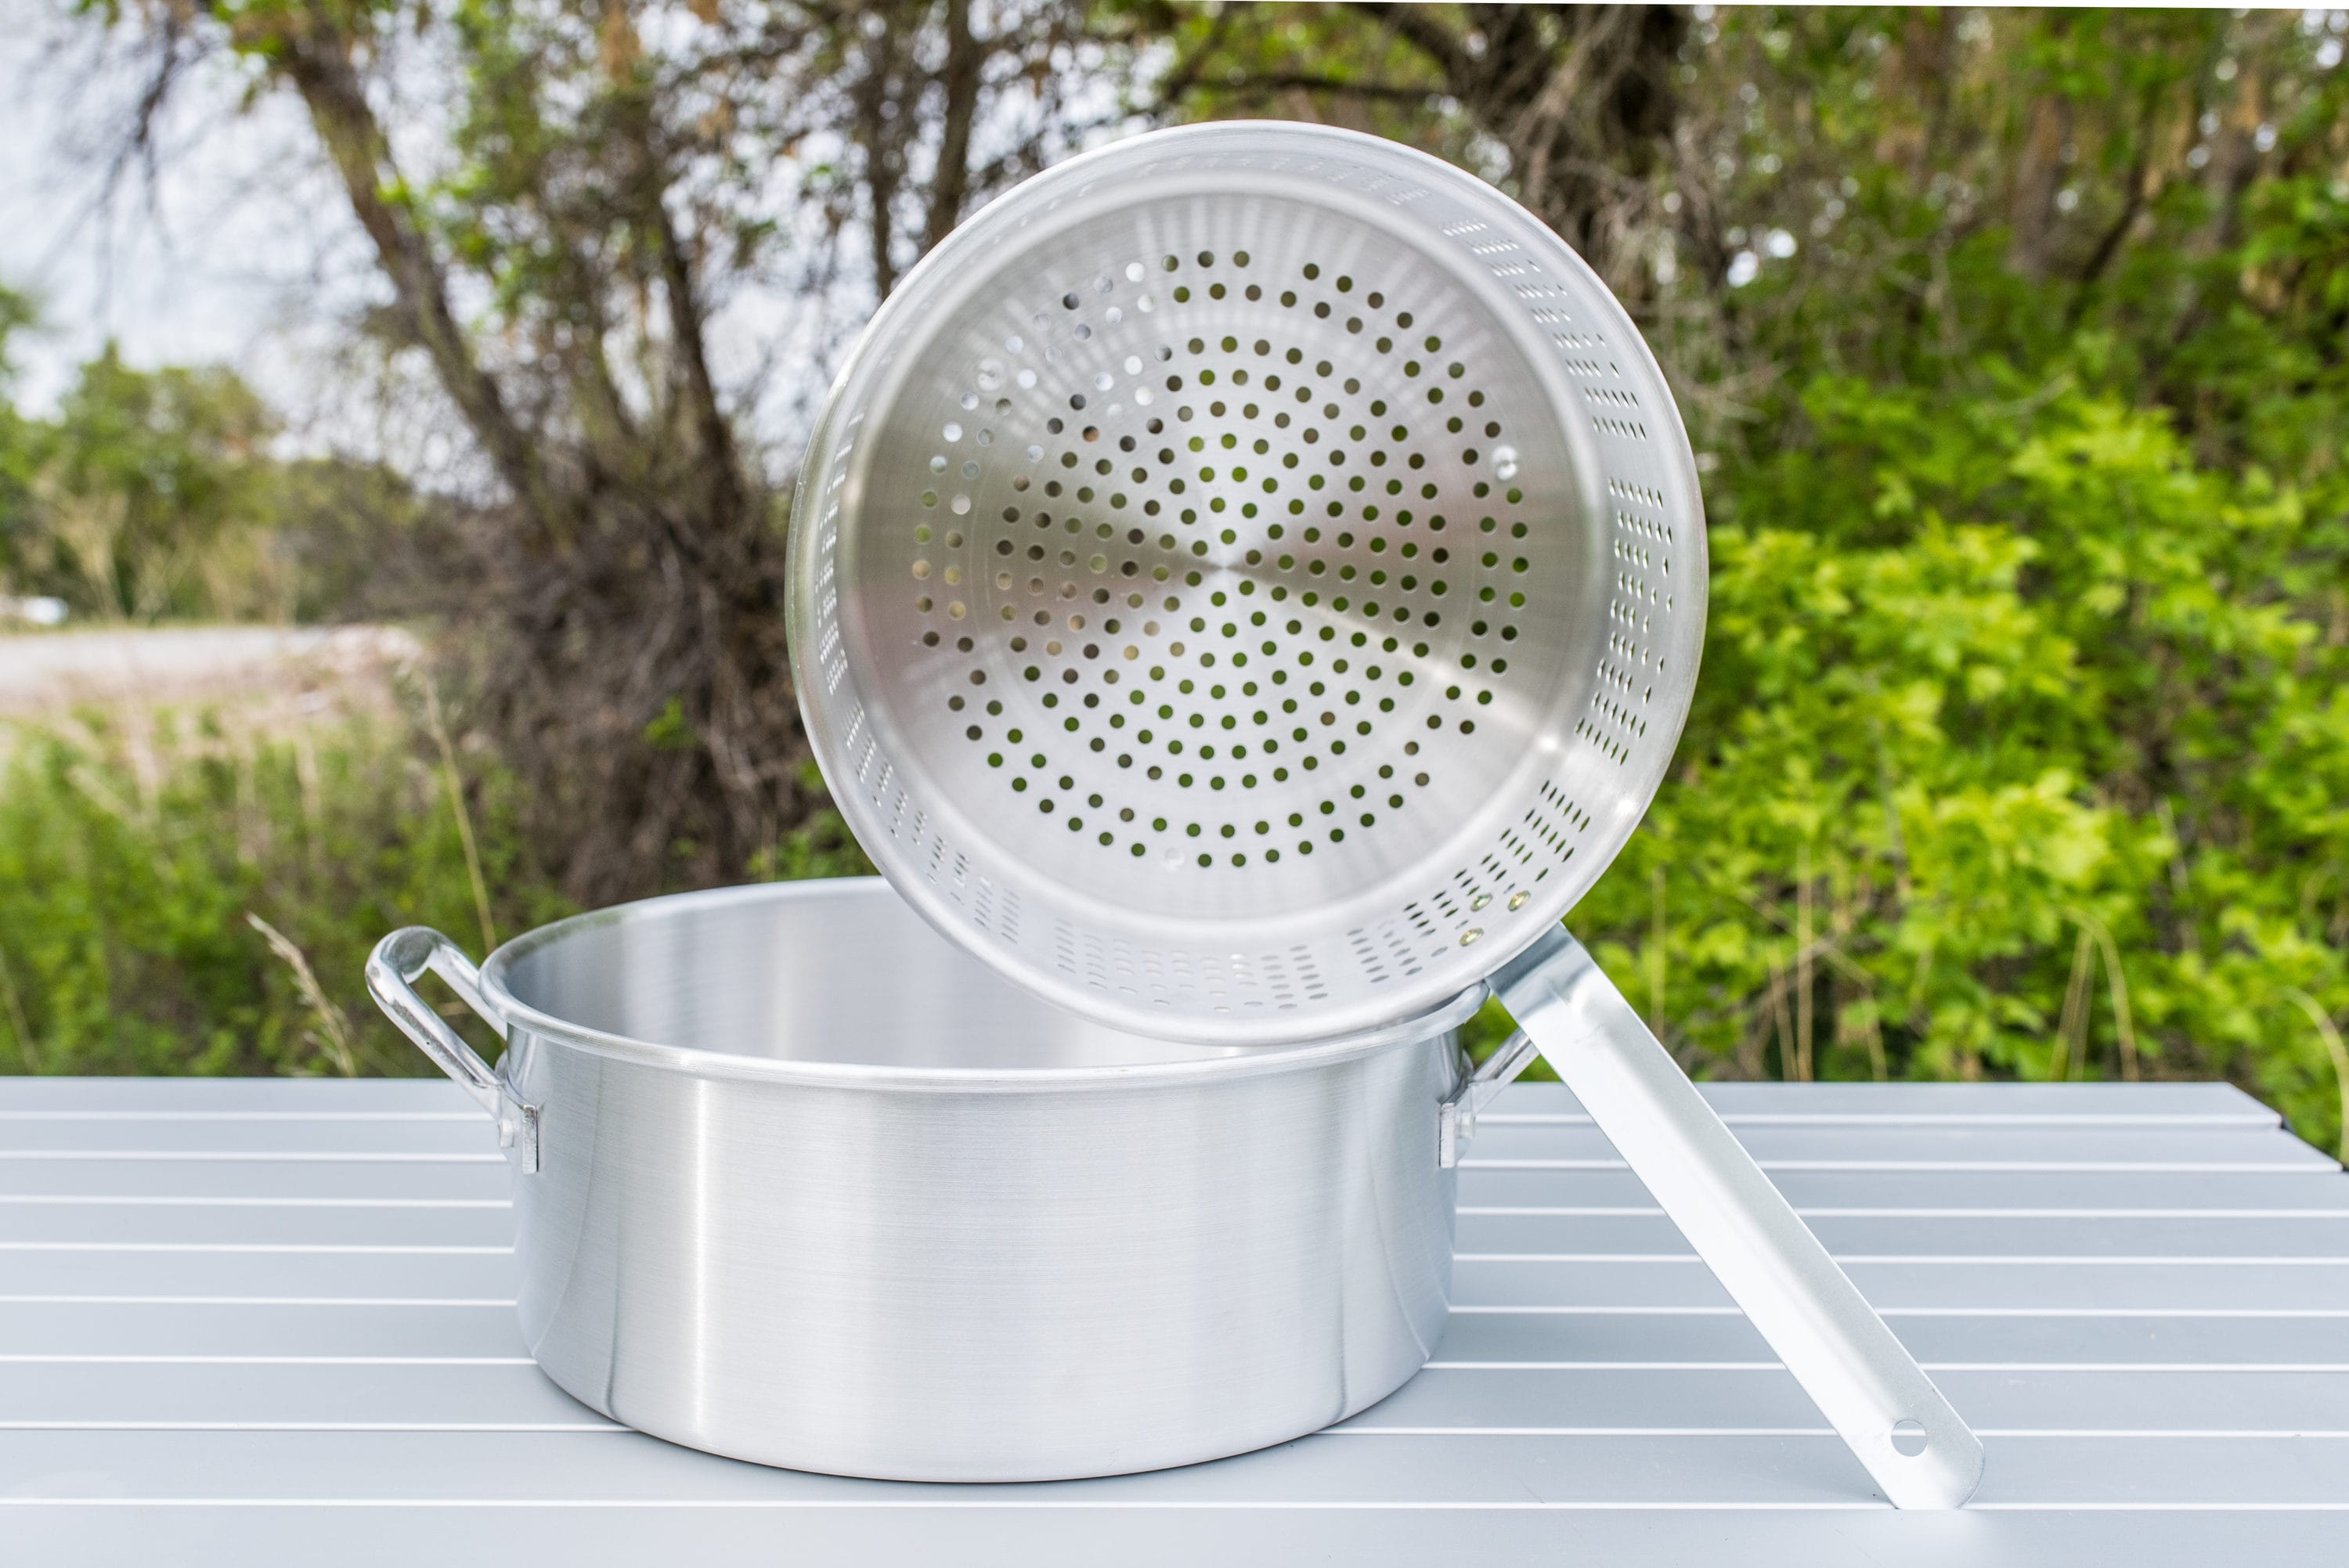 Camp Chef Aluminum Hot Water Pot with Dispenser in the Grill